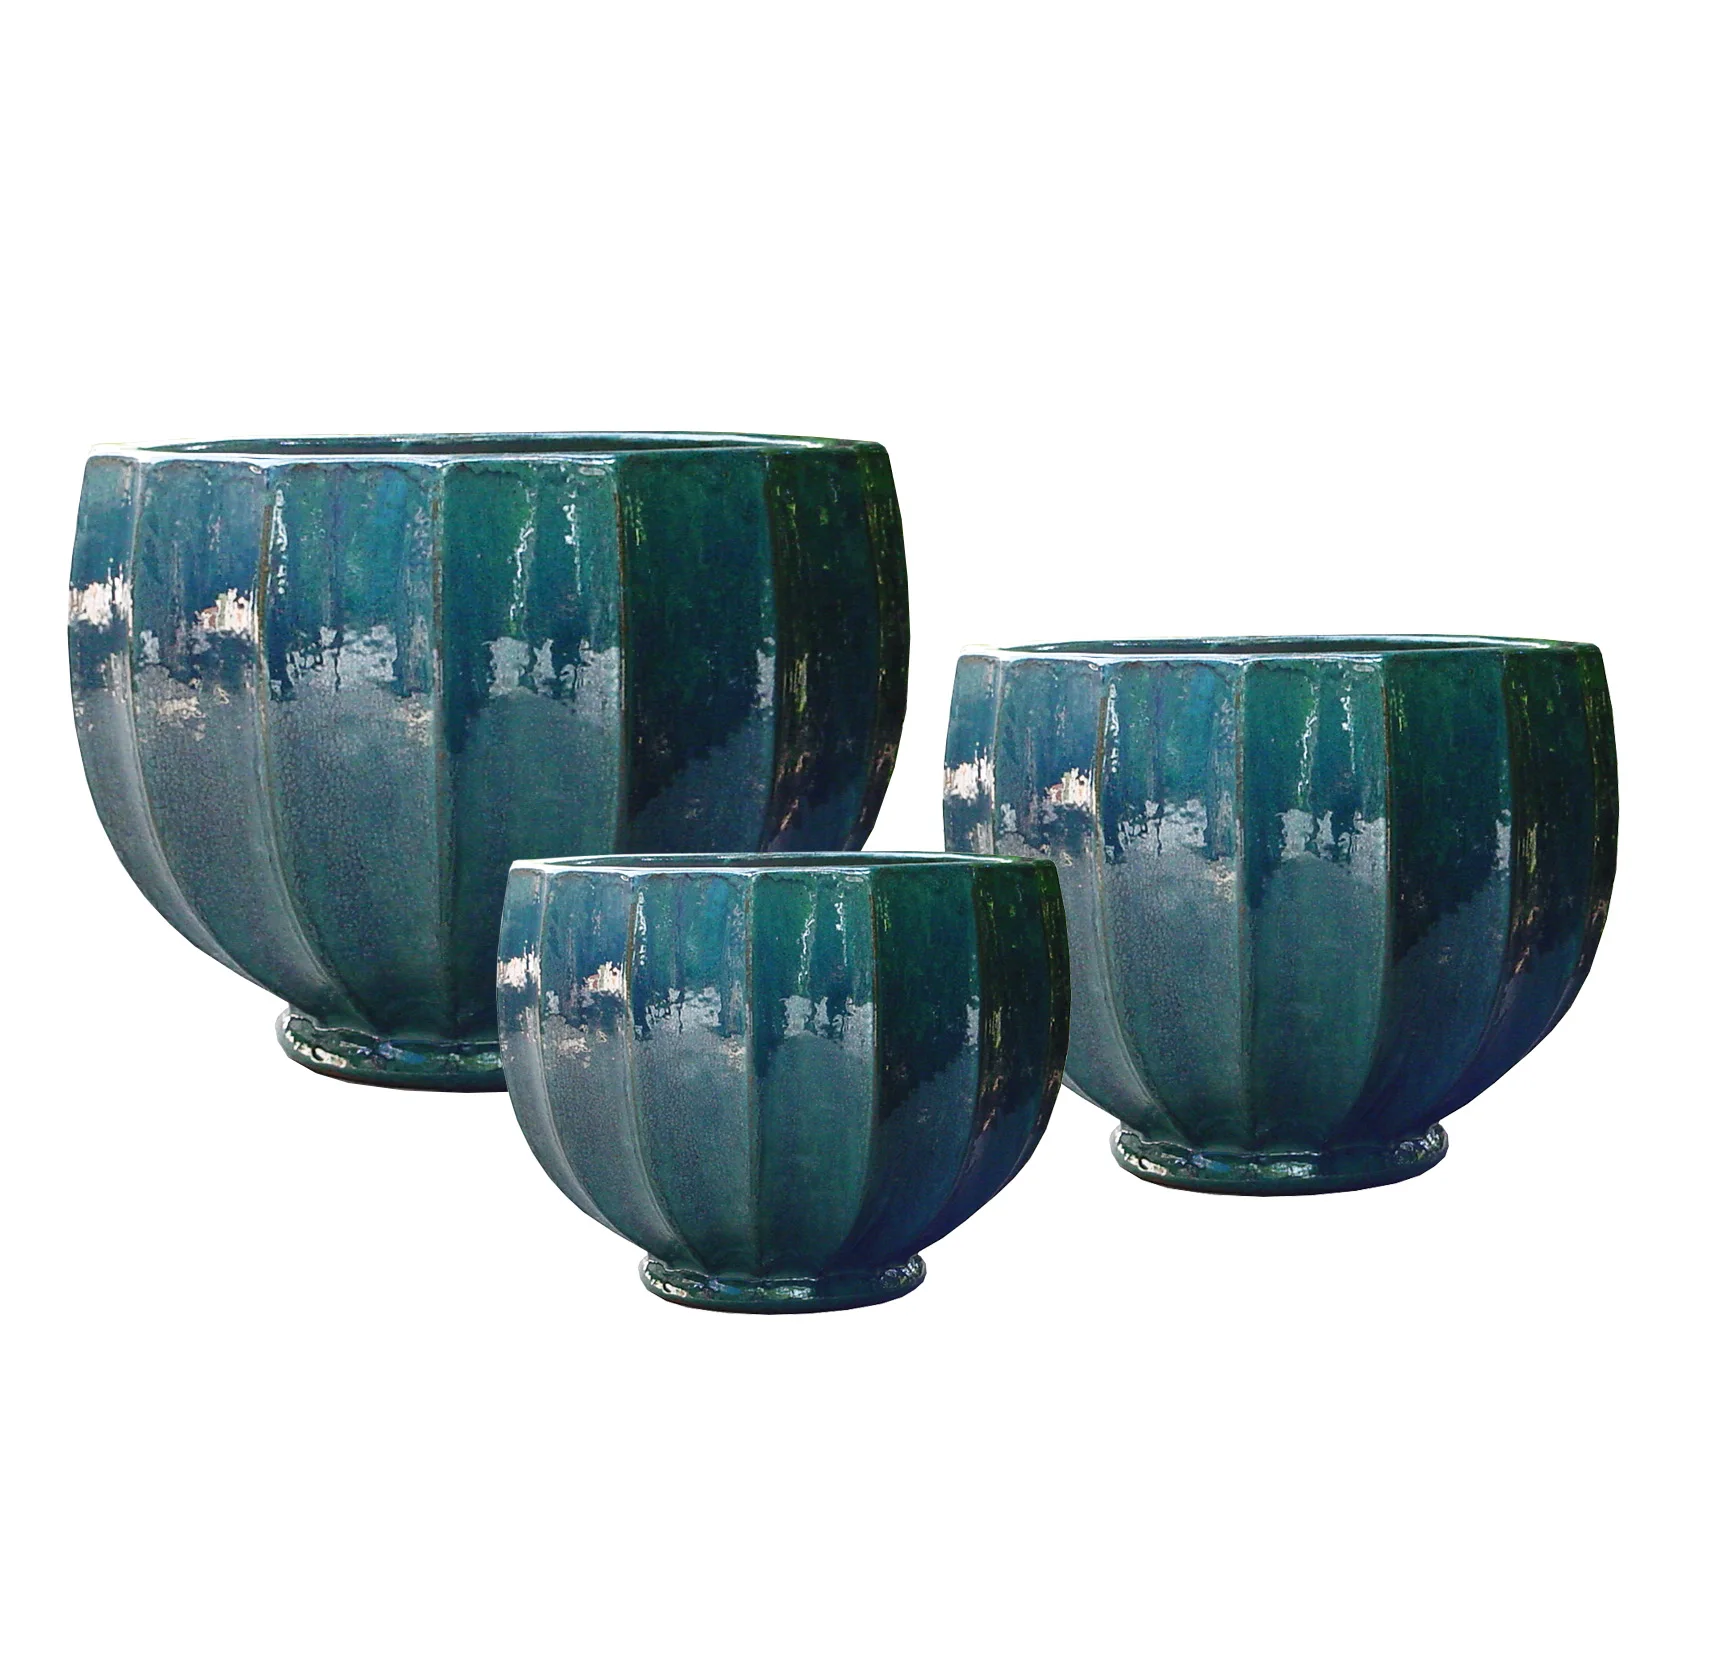 Wholesale Rustic Outdoor Glazed Pottery Ceramic Flower Pots and Garden Plant Planters for Home Use for Floor Application